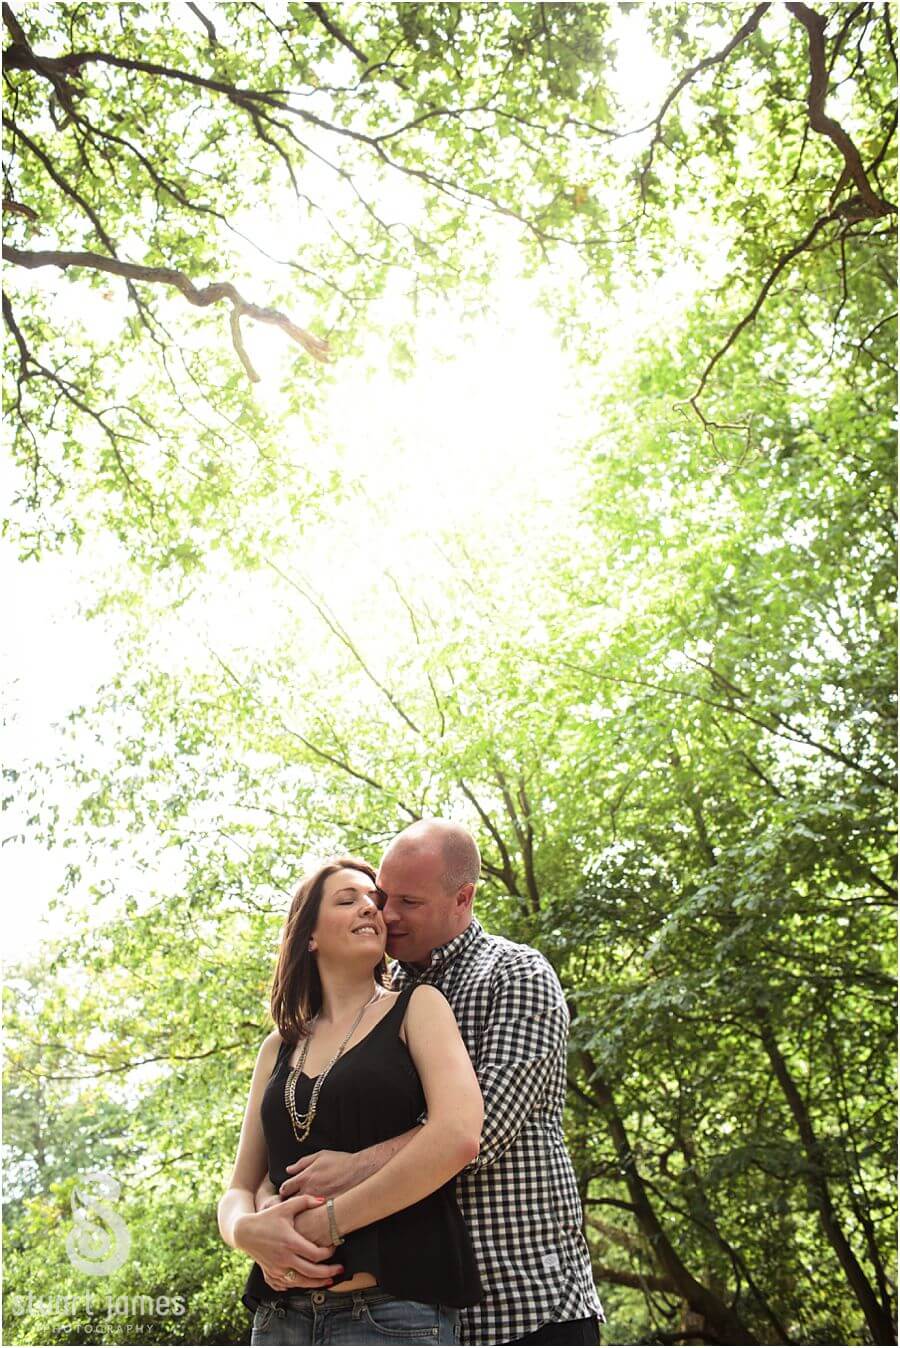 Contemporary and relaxed engagement portraits in Epping Forest in nr Walthamstow, London by Walthamstow Documentary Wedding Photographer Stuart James